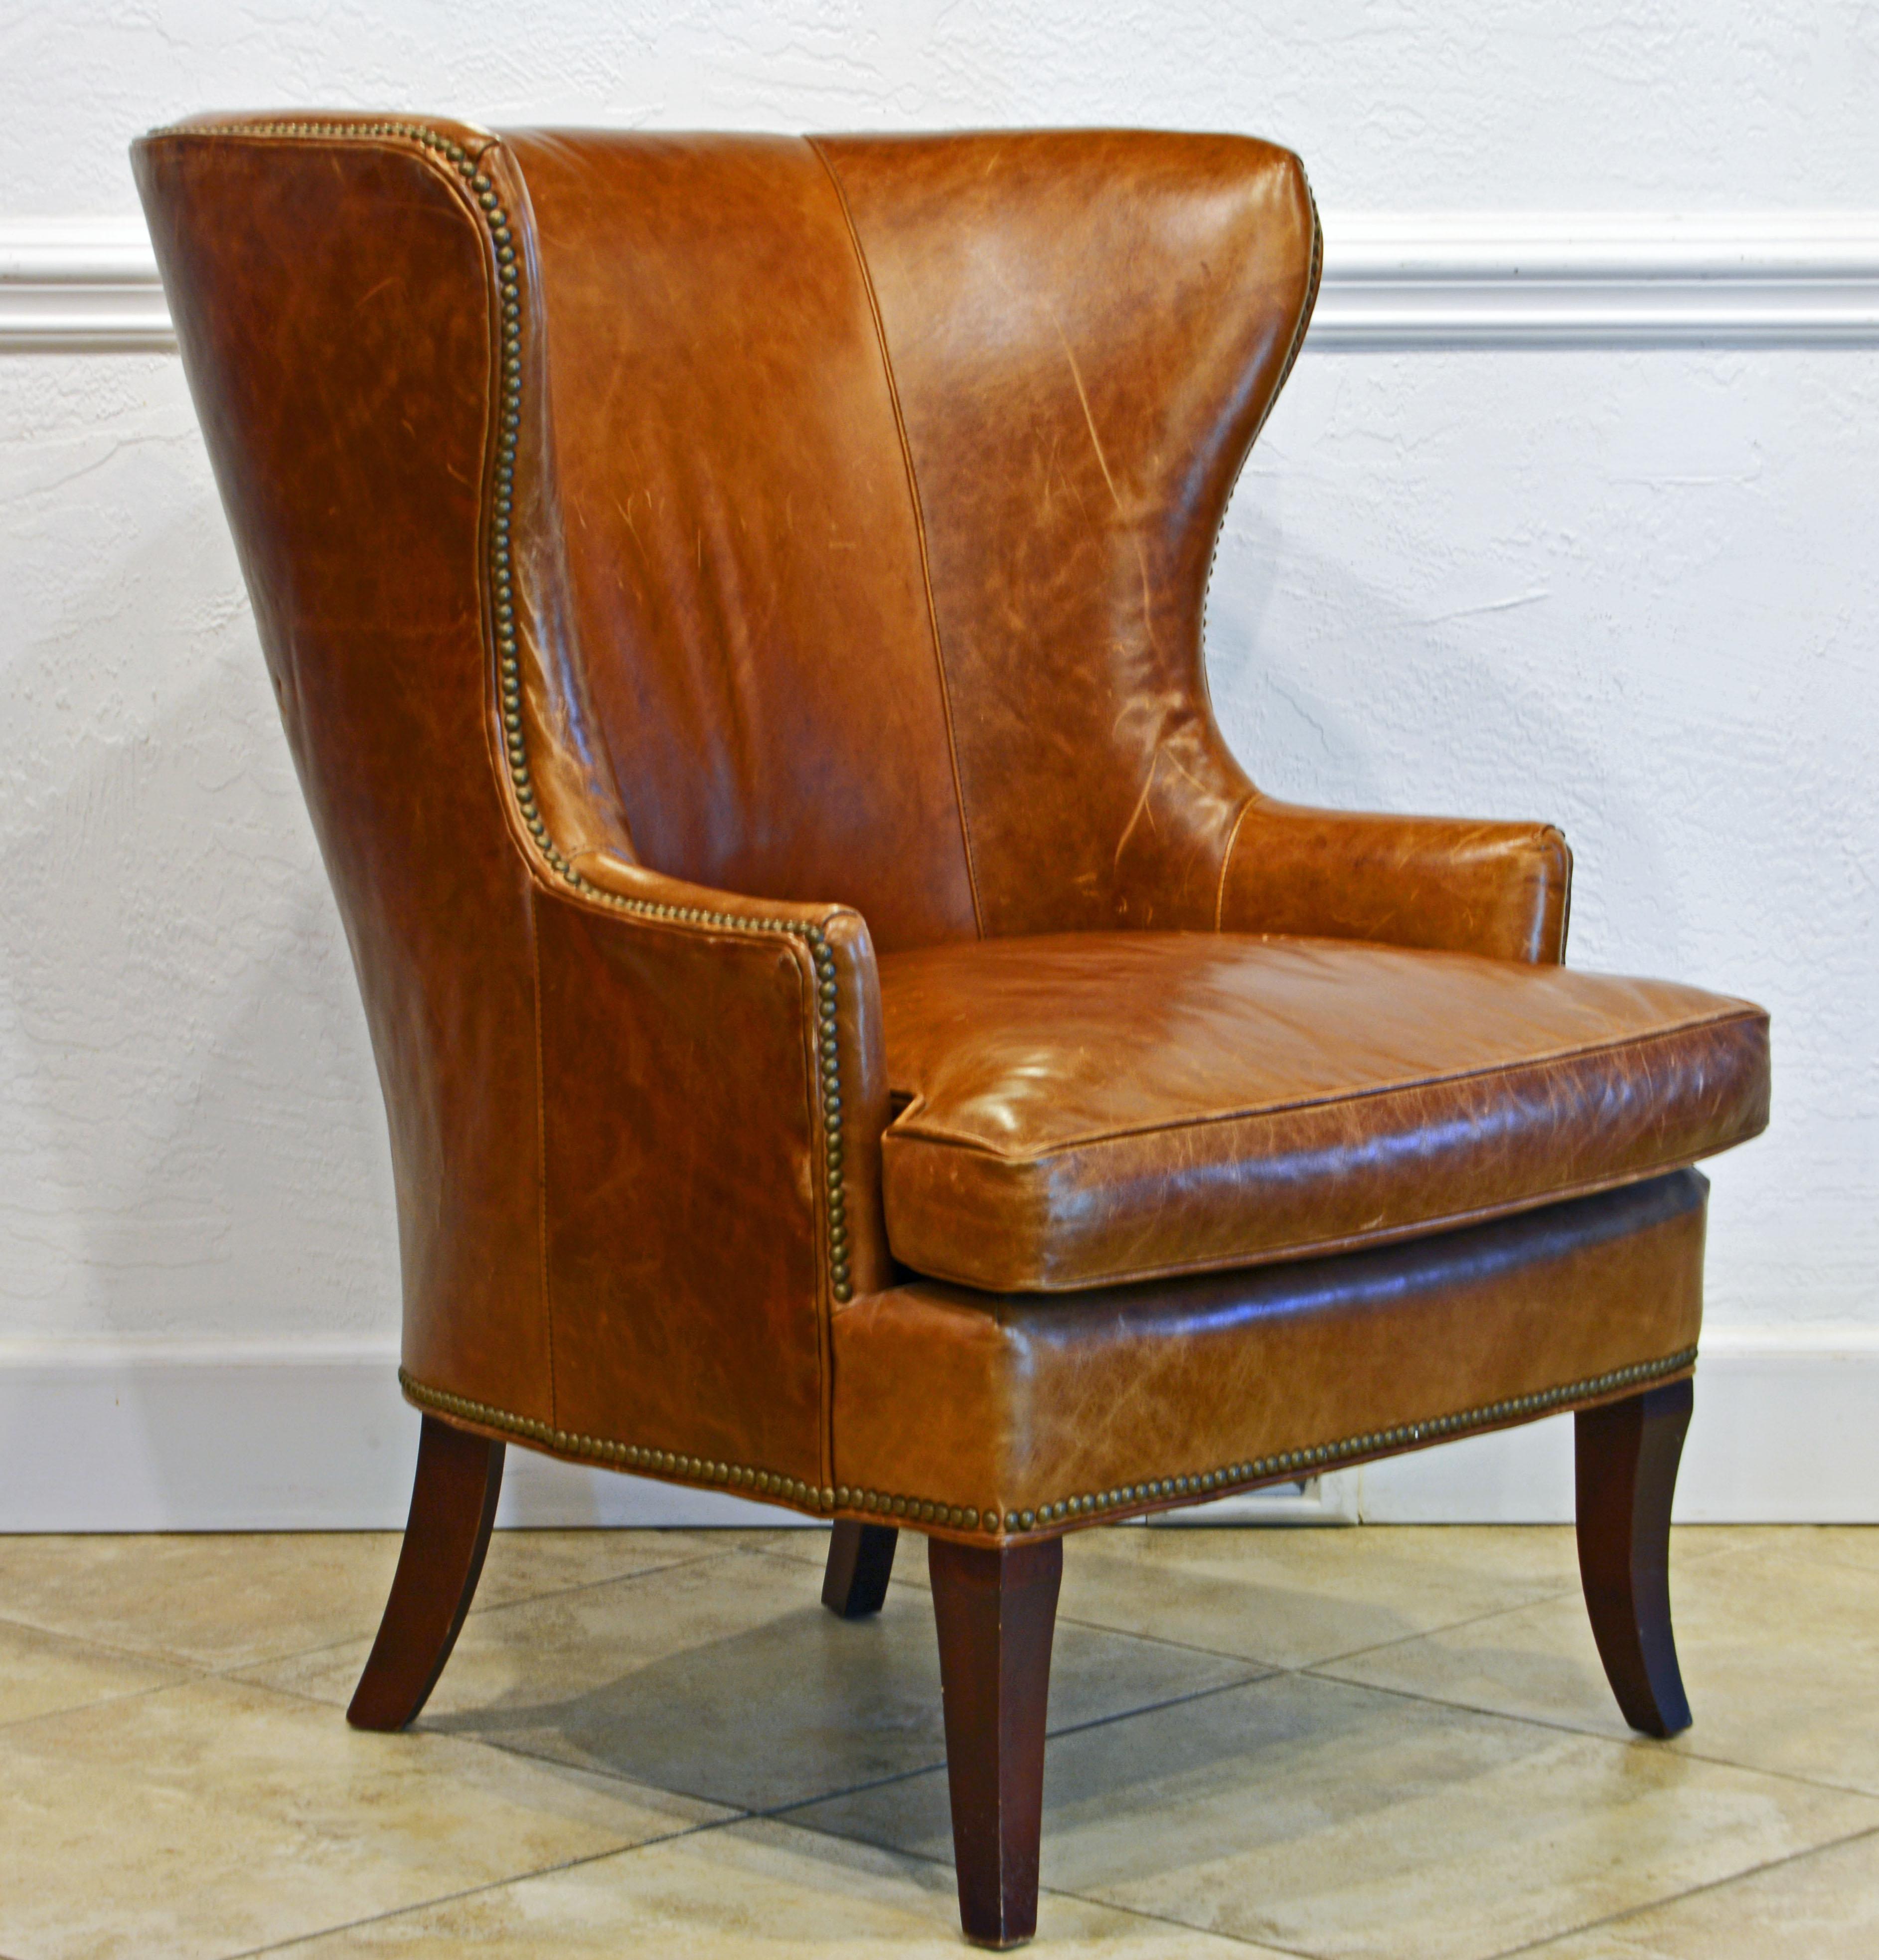 American Mid-Century Modern Sculptural Nail Head Trimmed Tanned Leather Wing Chair